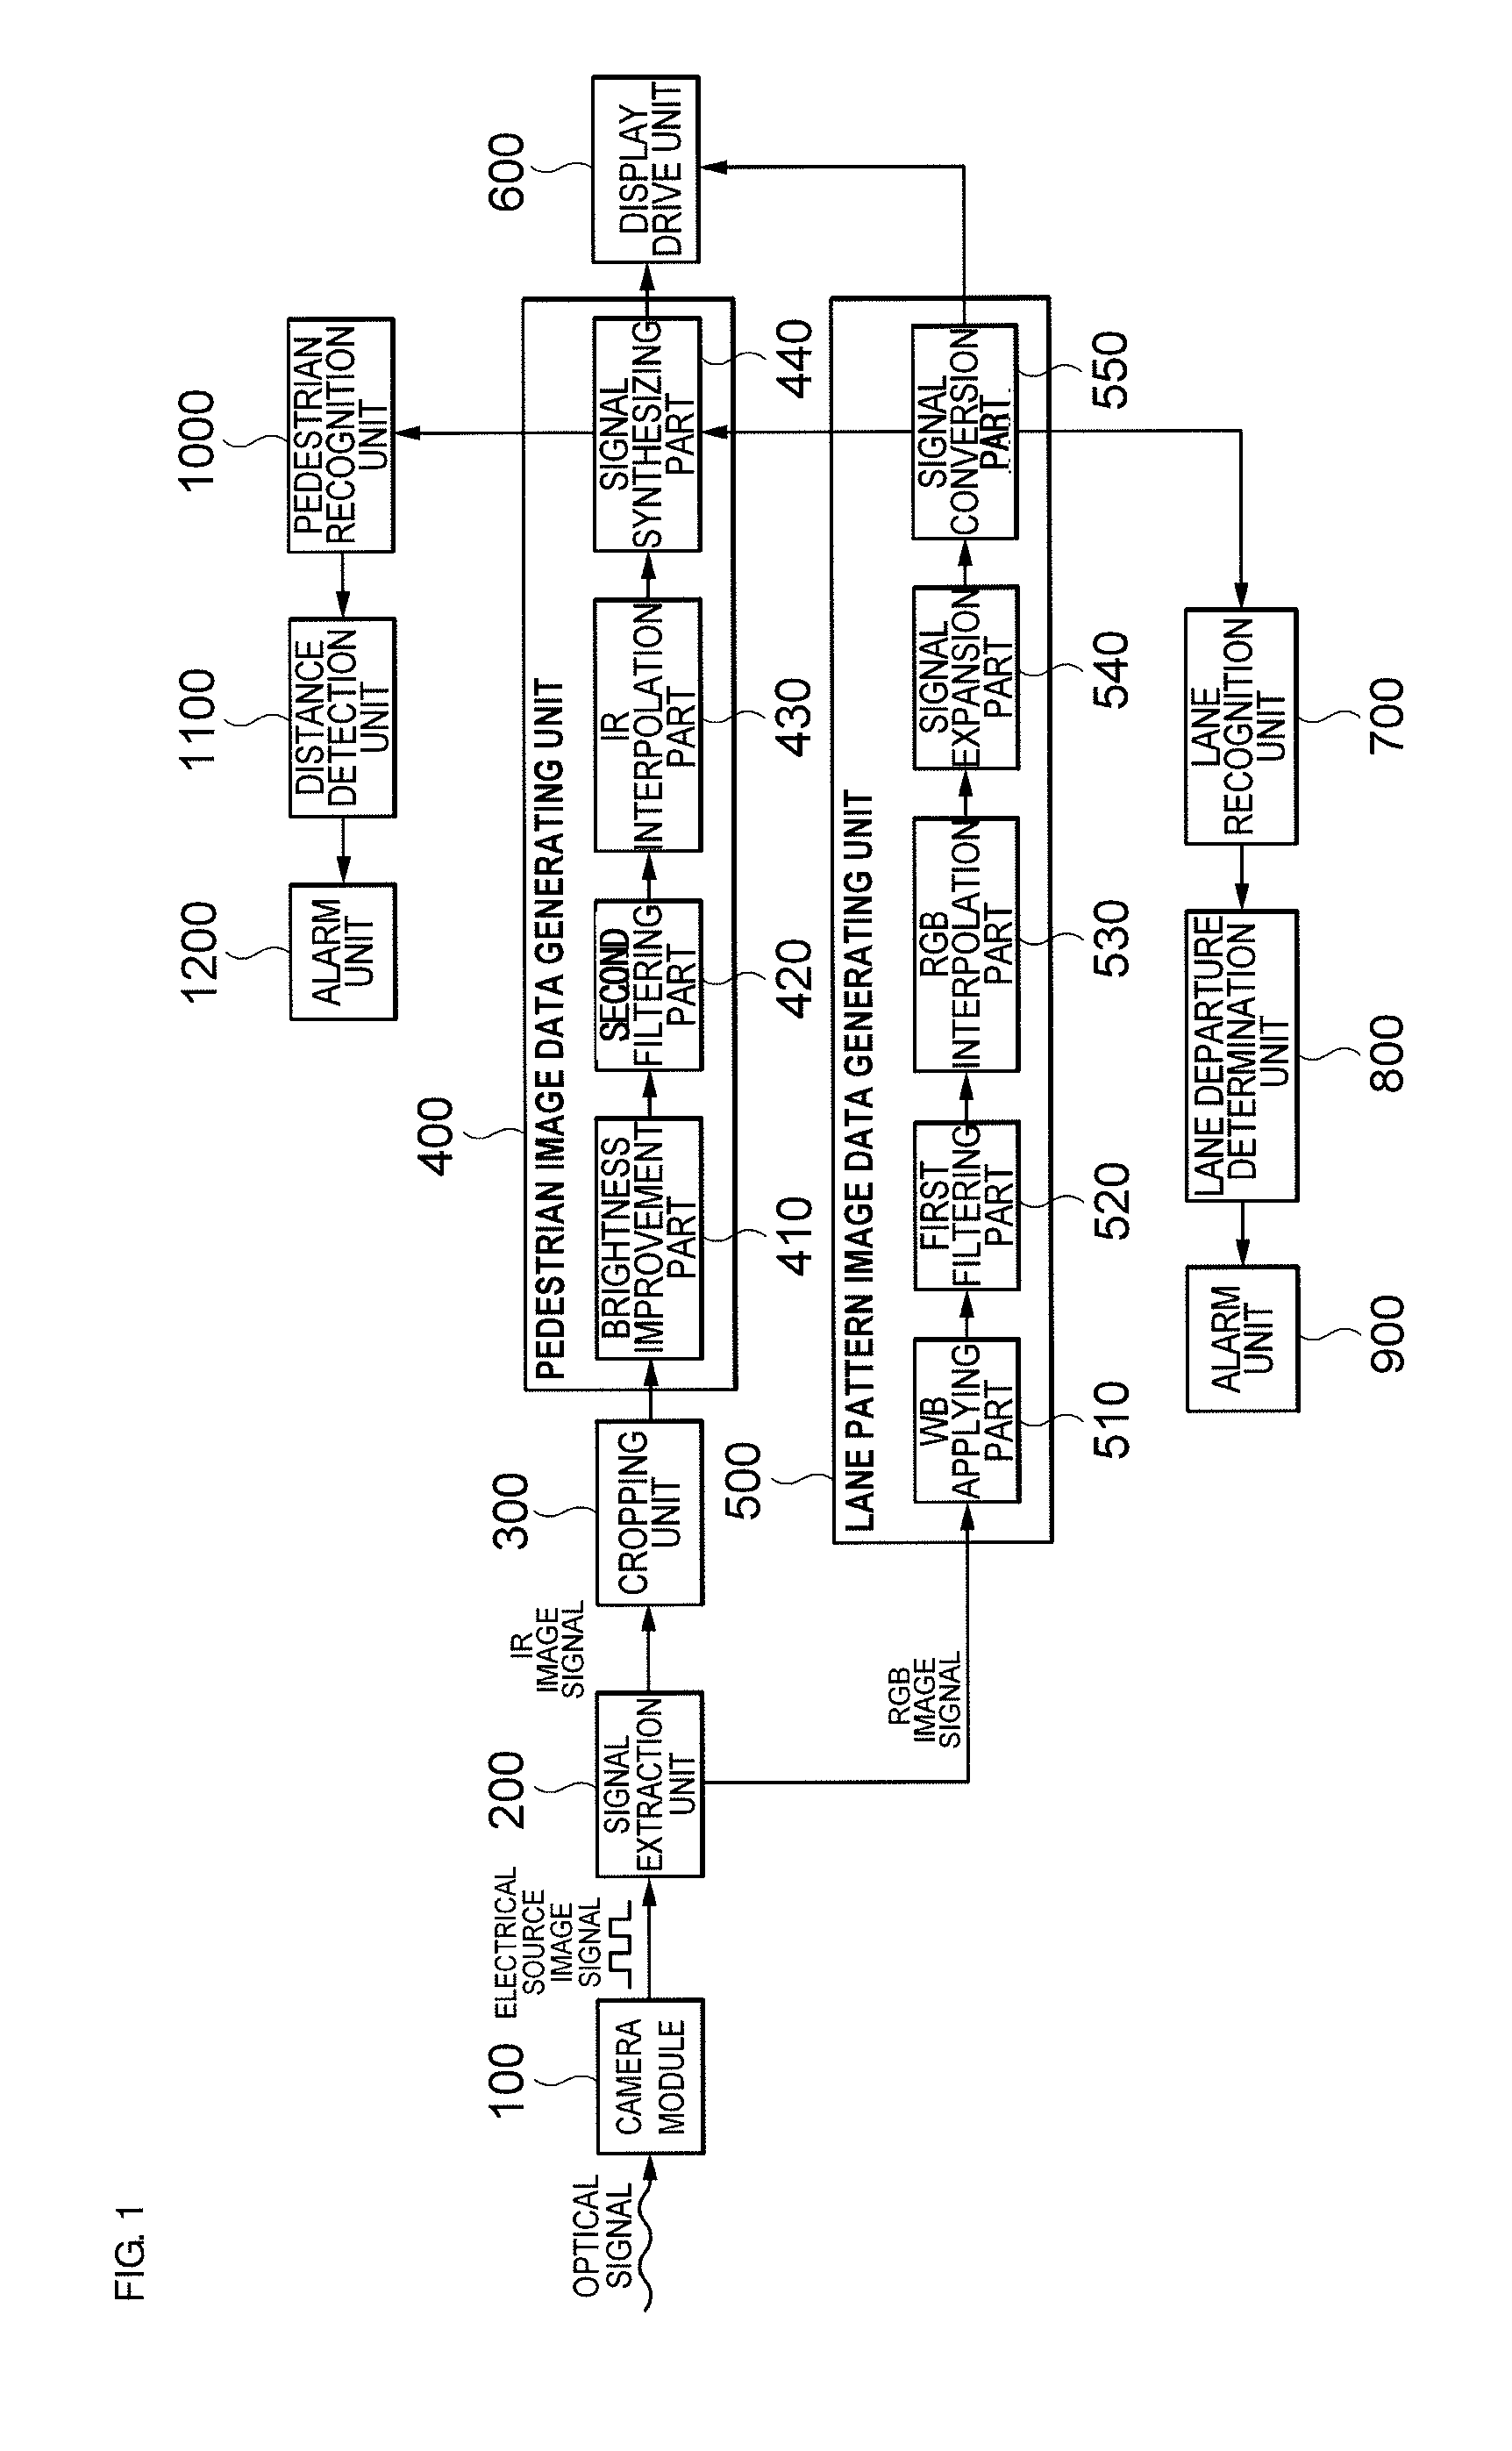 System and method of assisting visibility of driver